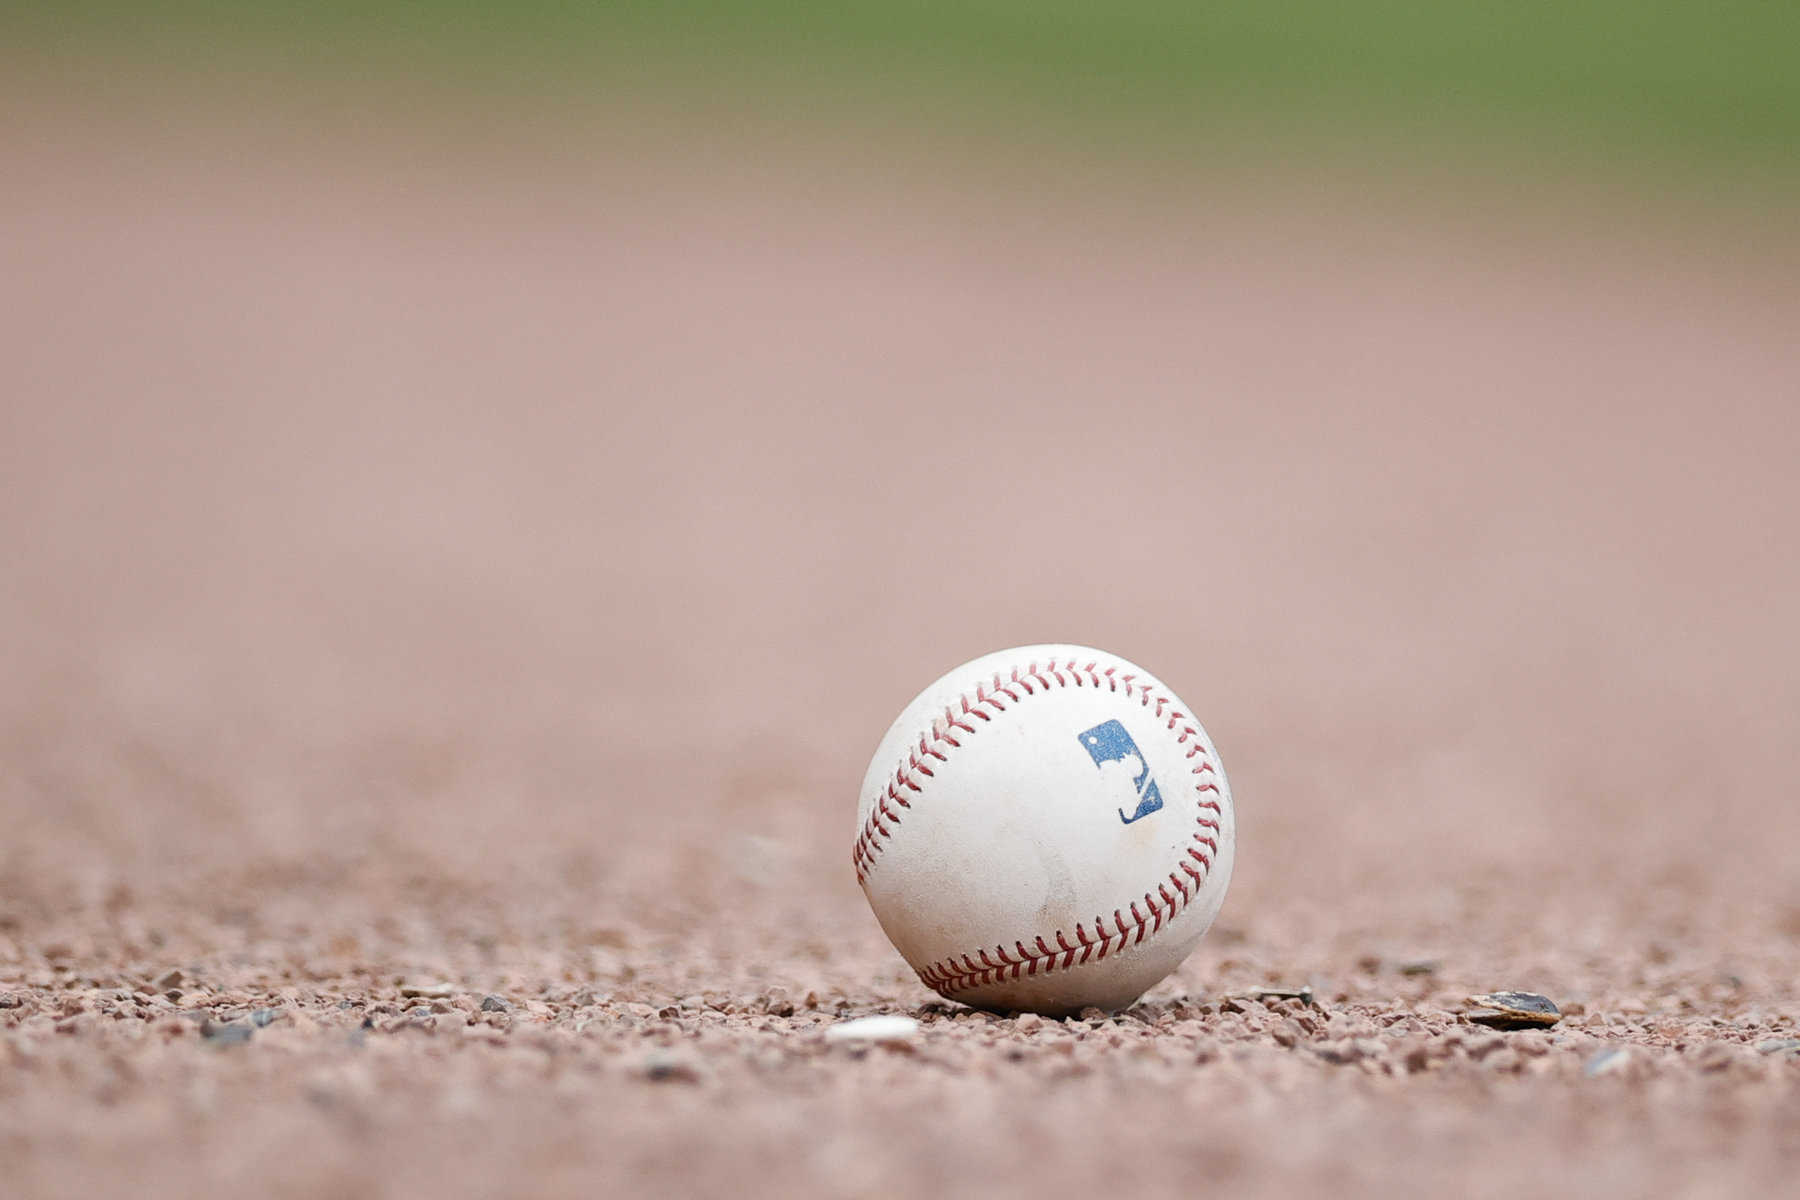 MLB DFS Punt Plays For DraftKings and FanDuel (April 9)